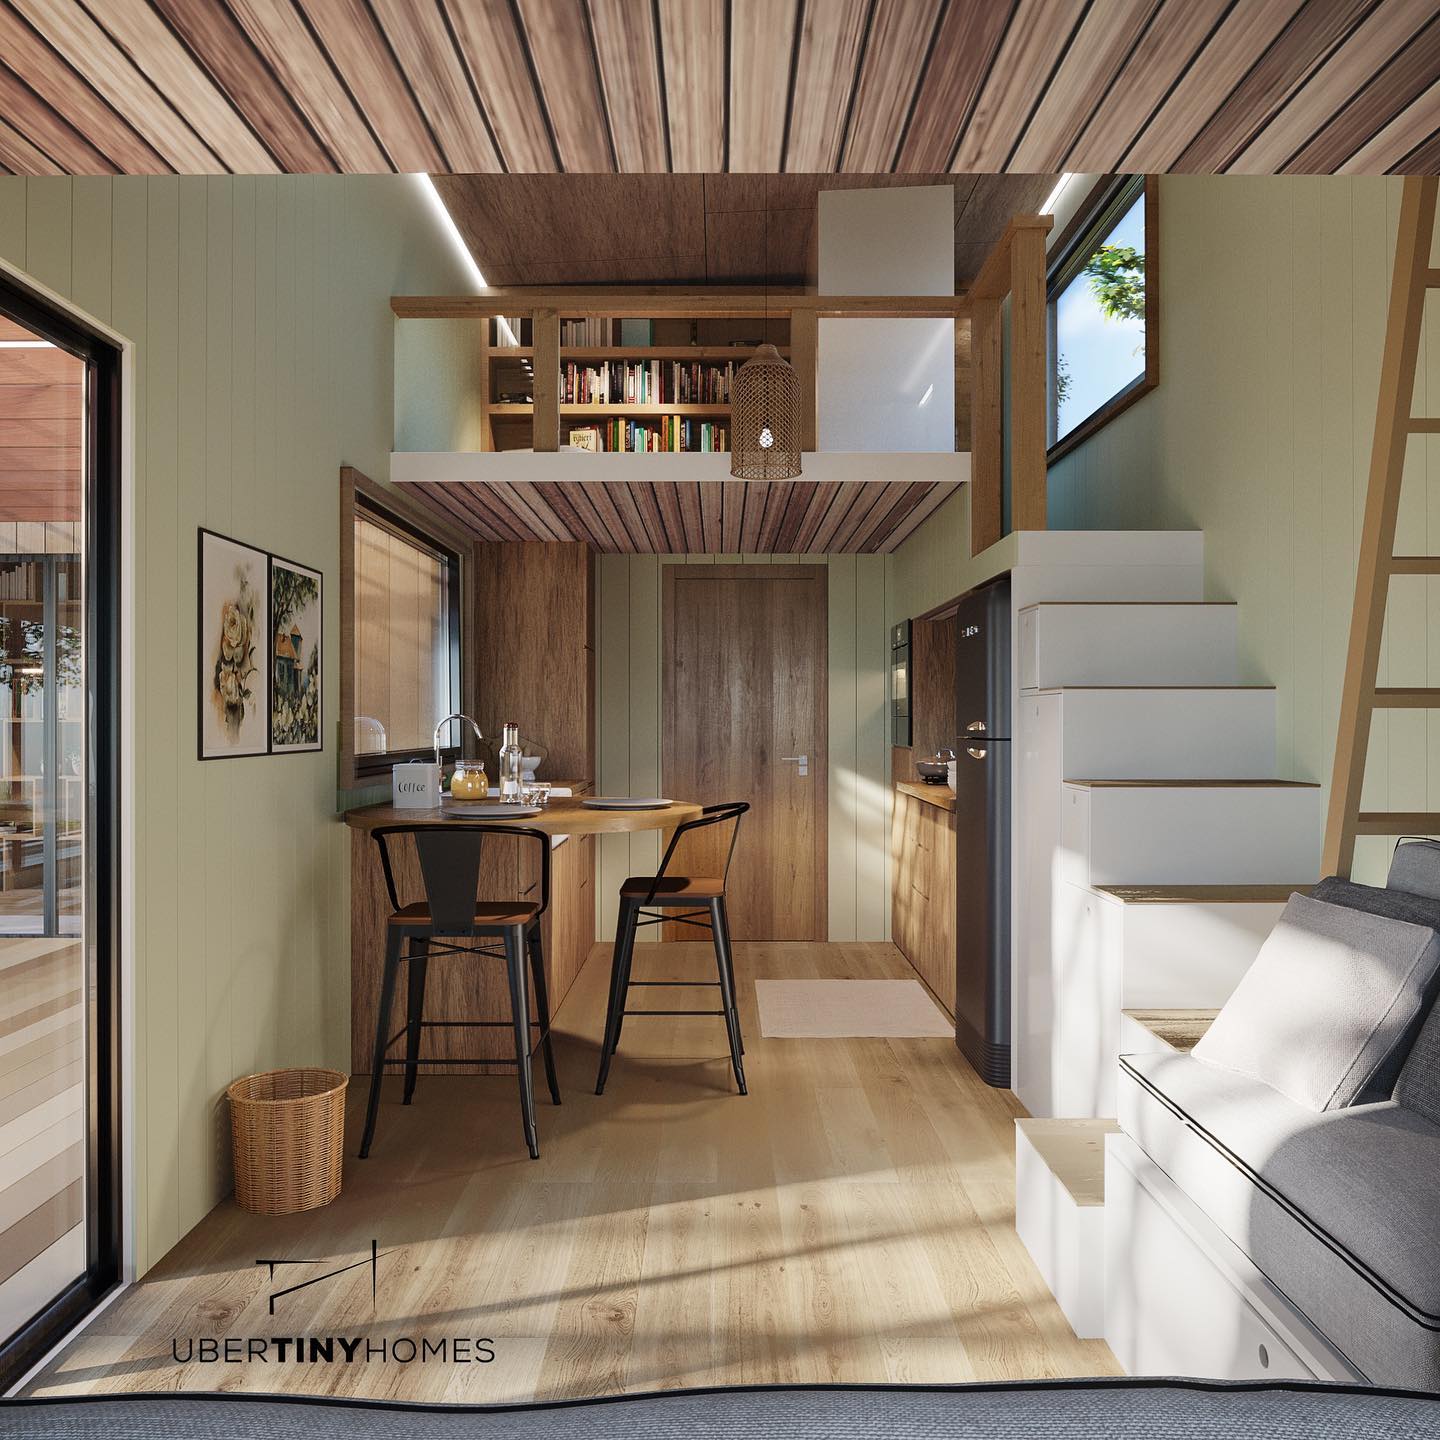 Casa Del Amor is a Two-Loft Tiny House Featuring an Office